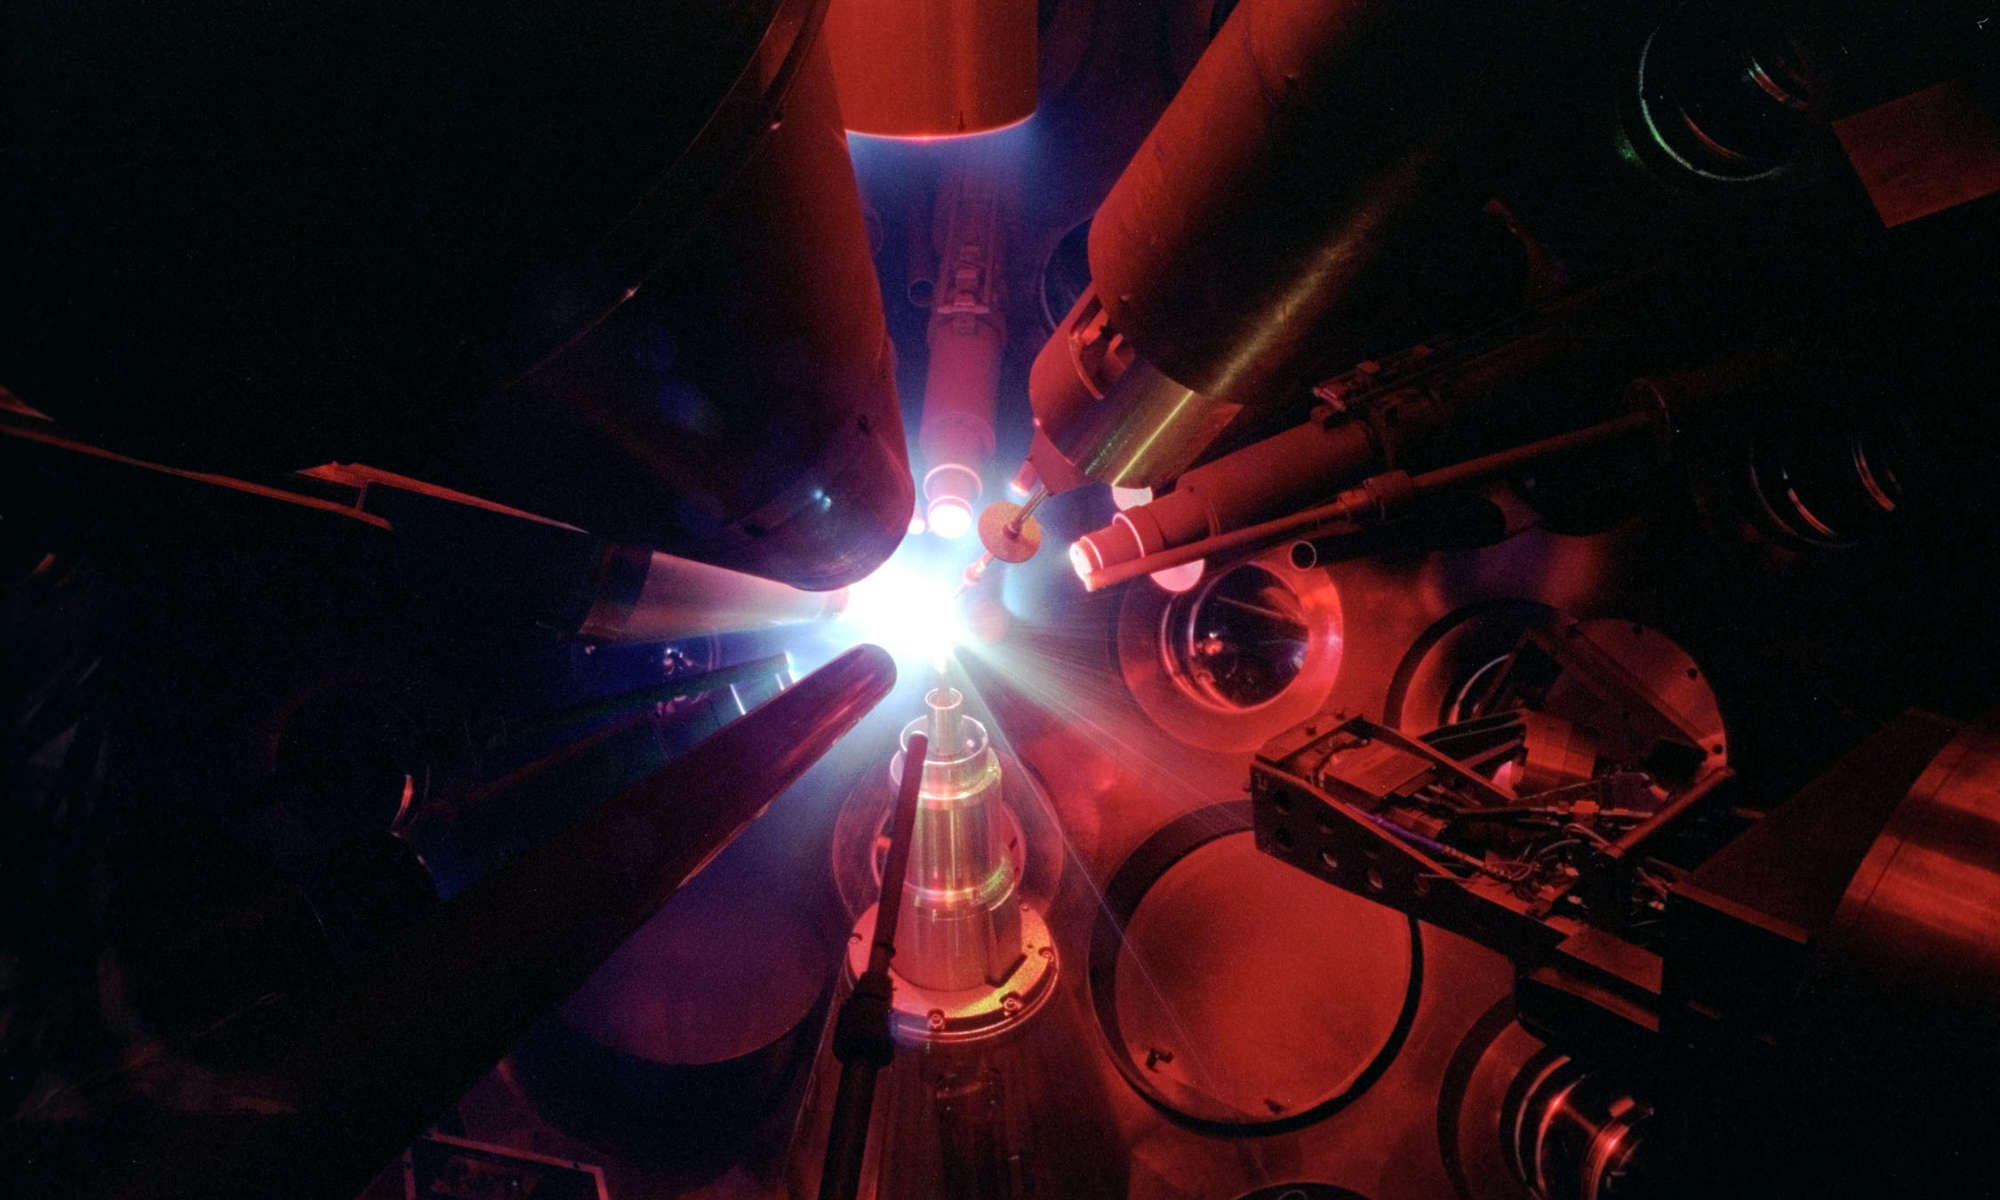 Inside the OMEGA target chamber, multiple lasers are aimed at a target amid a red cast of light.